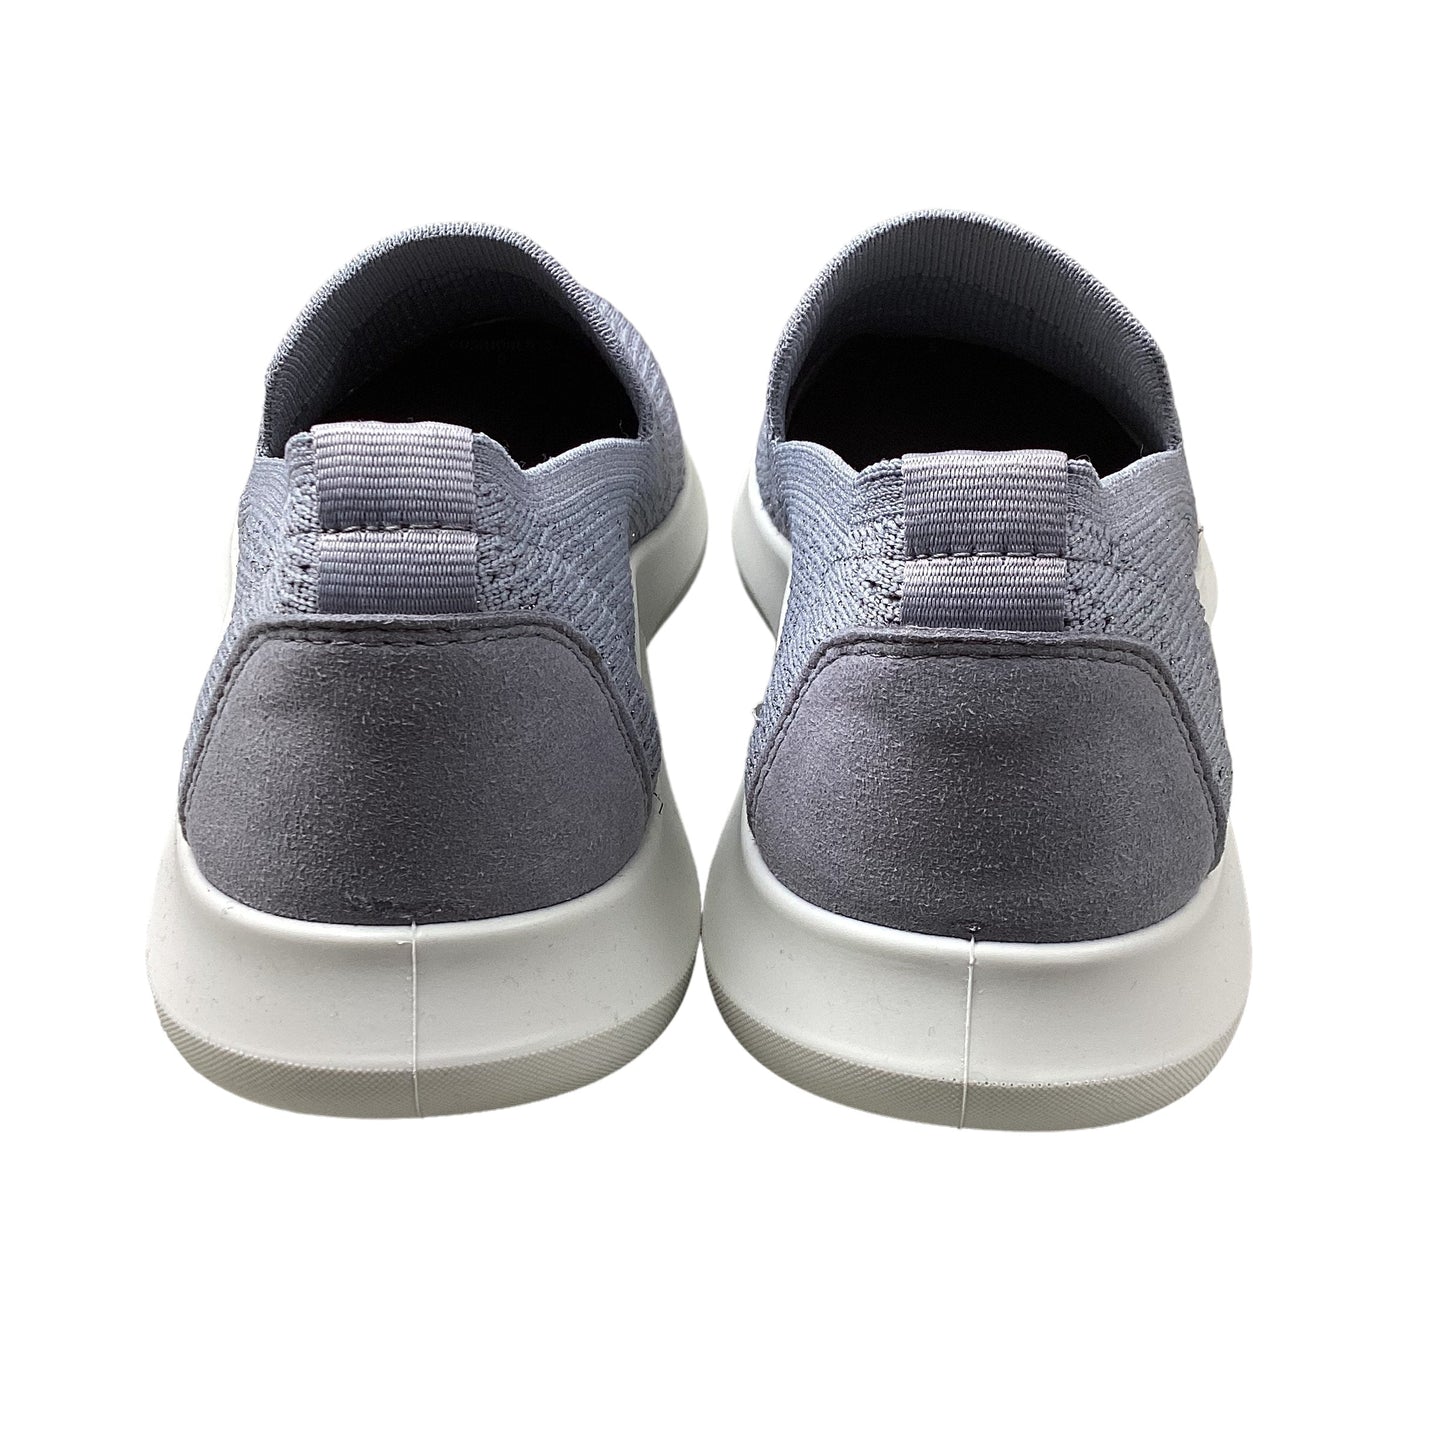 Grey Shoes Sneakers Clothes Mentor, Size 7